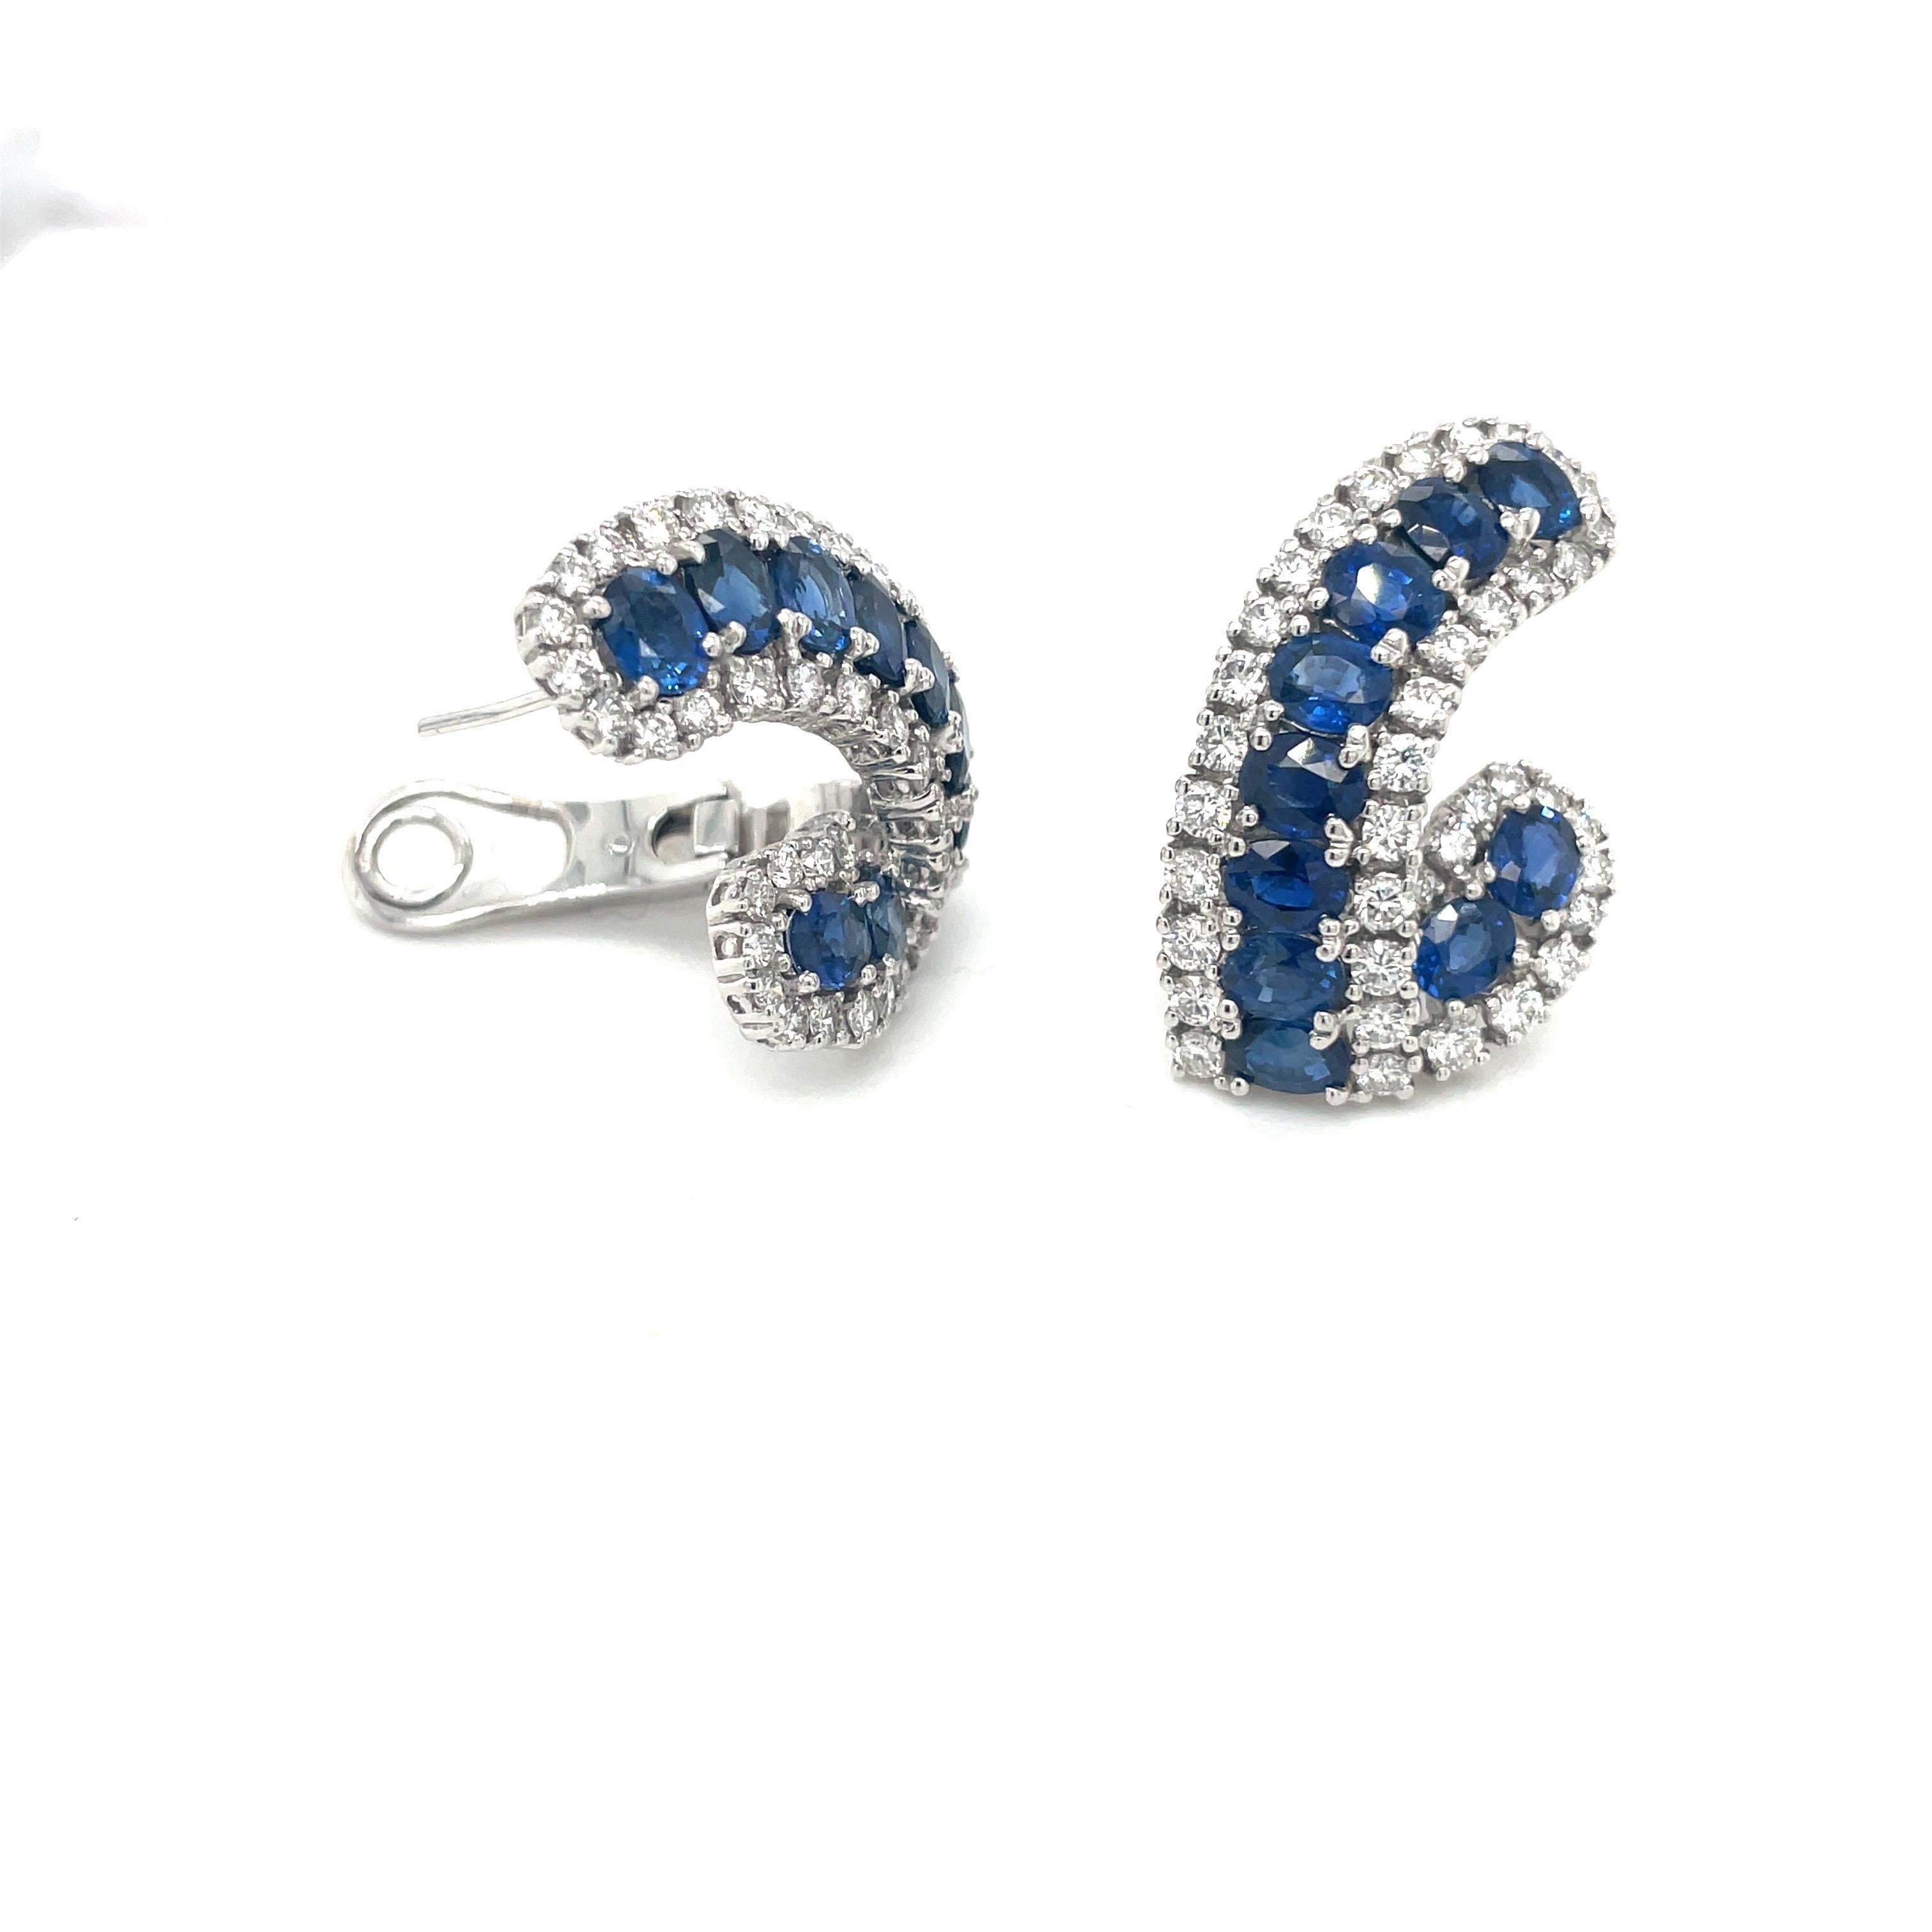 Contemporary 18KT White Gold 9.38Ct Blue Sapphire 2.97Ct. Diamond Earrings For Sale